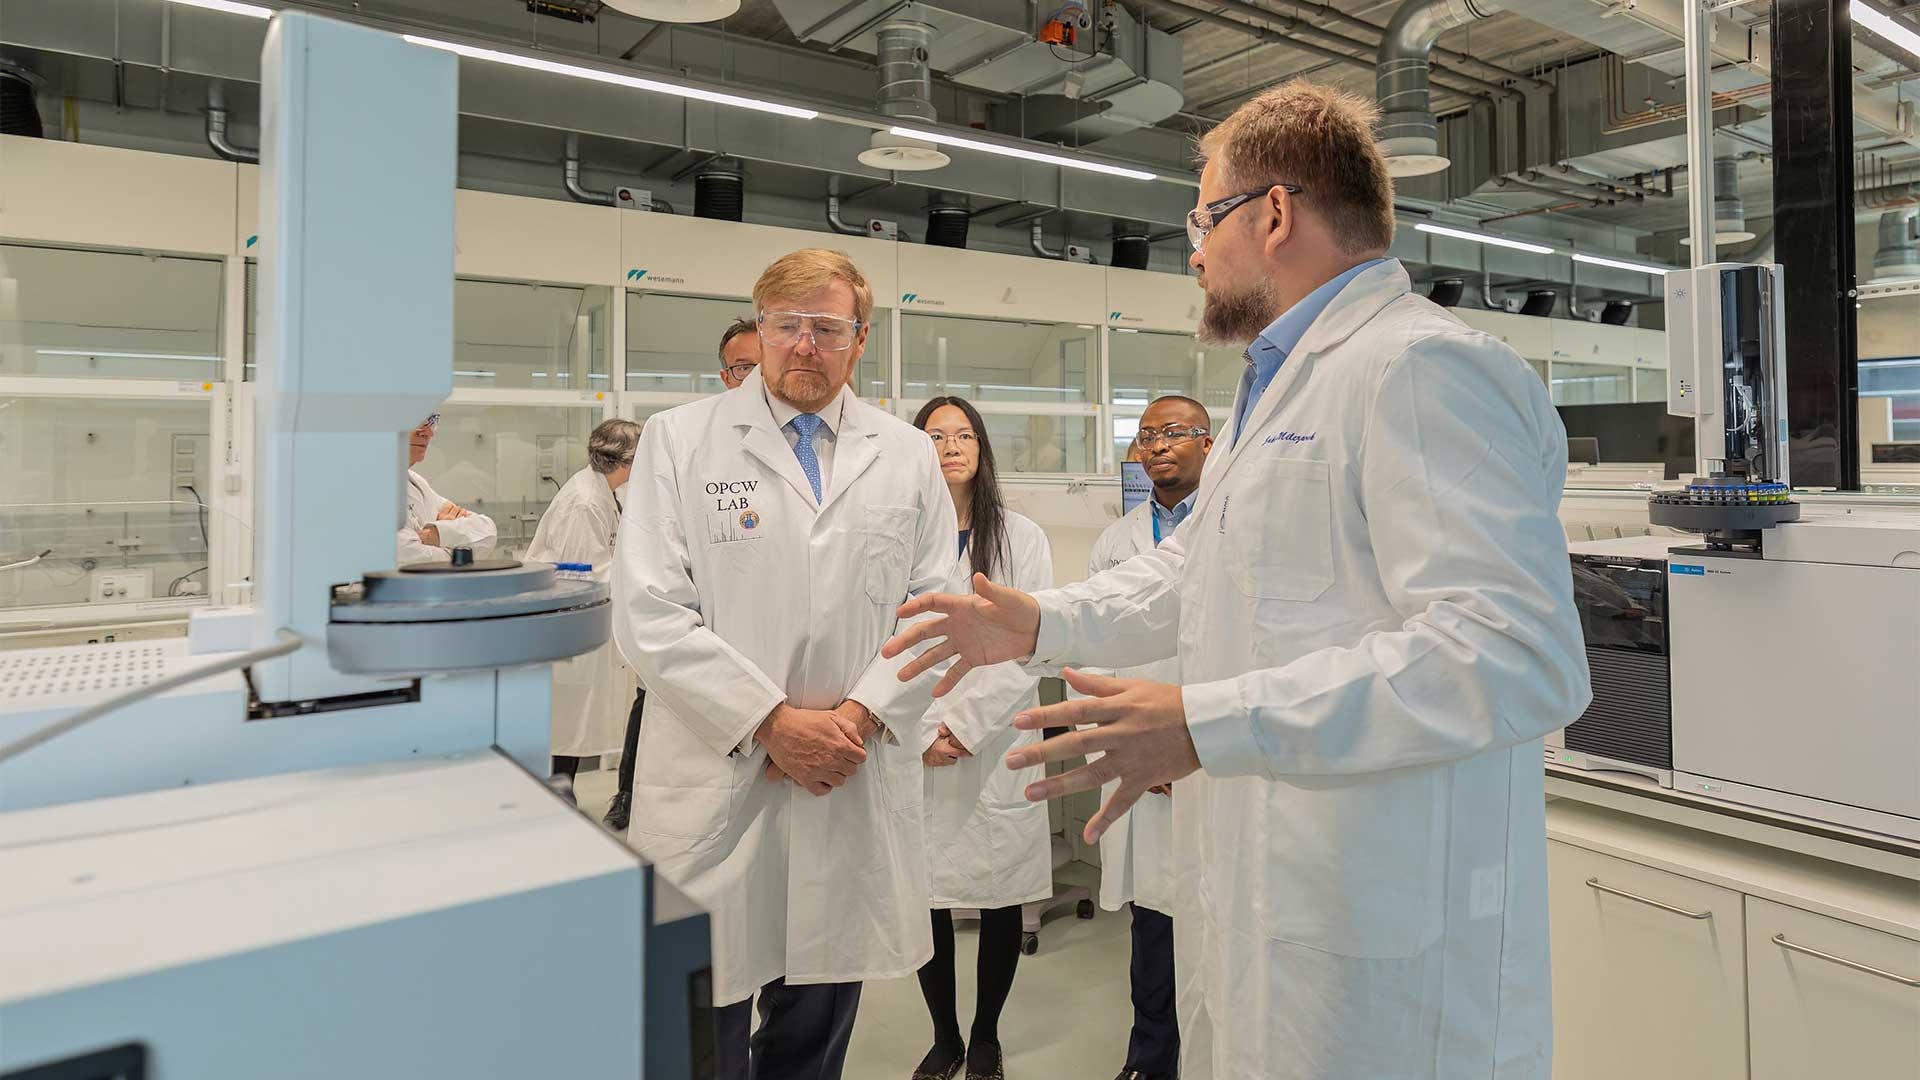 The Defense Threat Reduction Agency (DTRA) Director, Rebecca Hersman, recently attended the inauguration of the new Centre for Chemistry and Technology (ChemTech Centre) of the Organisation for the Prohibition of Chemical Weapons (OPCW) in The Hauge, Netherlands on May 12.